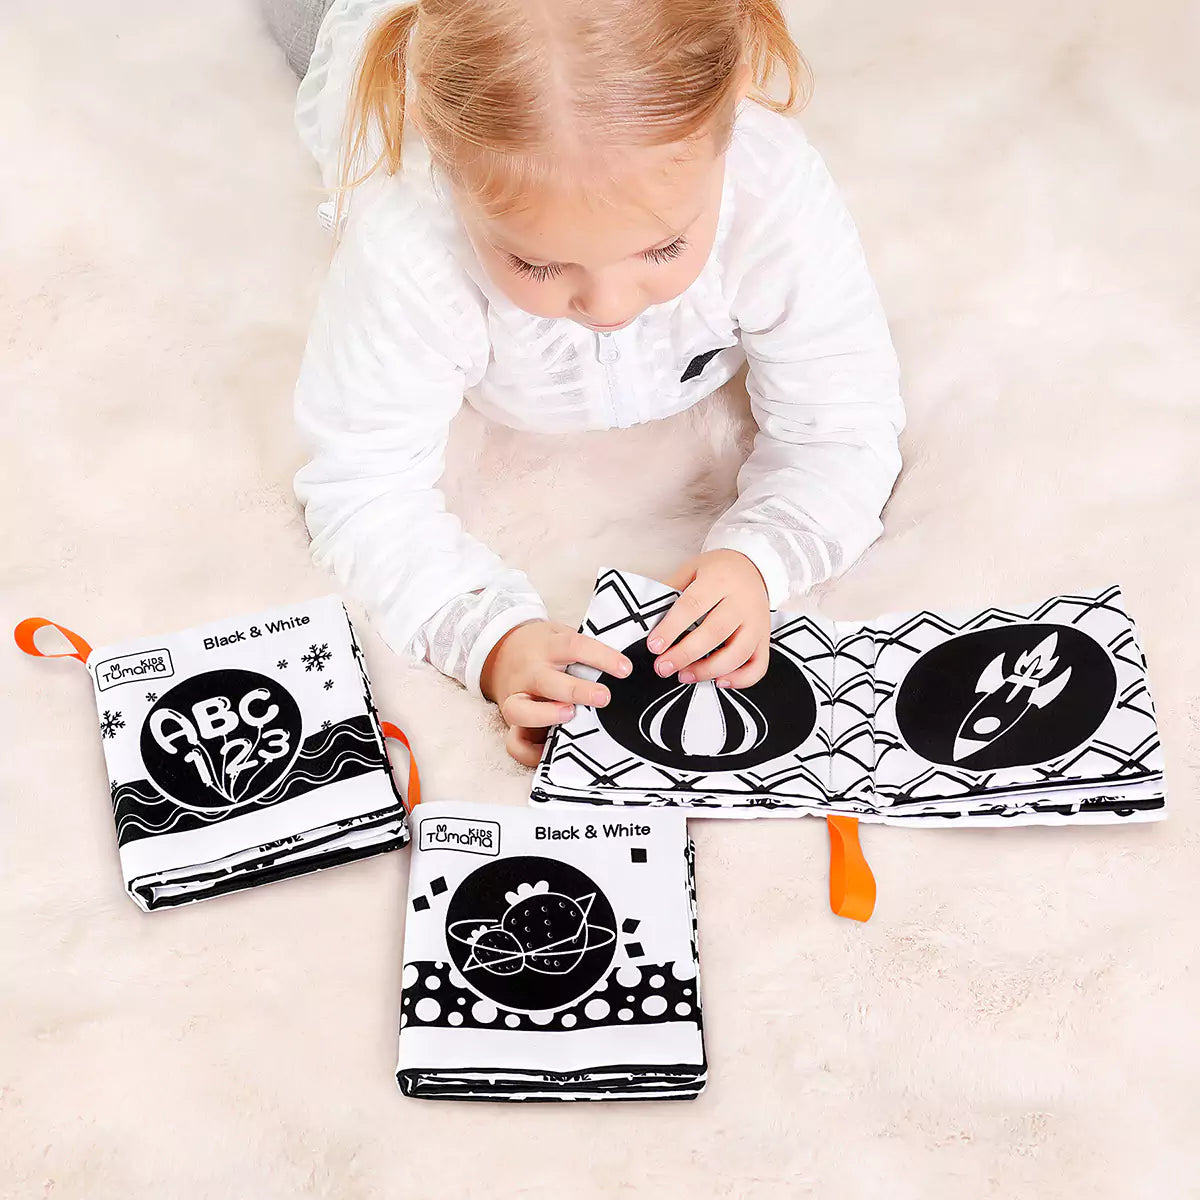 Black and white books, high contrast interactive crinkle soft book, early development toy set for newborn 0 Month+